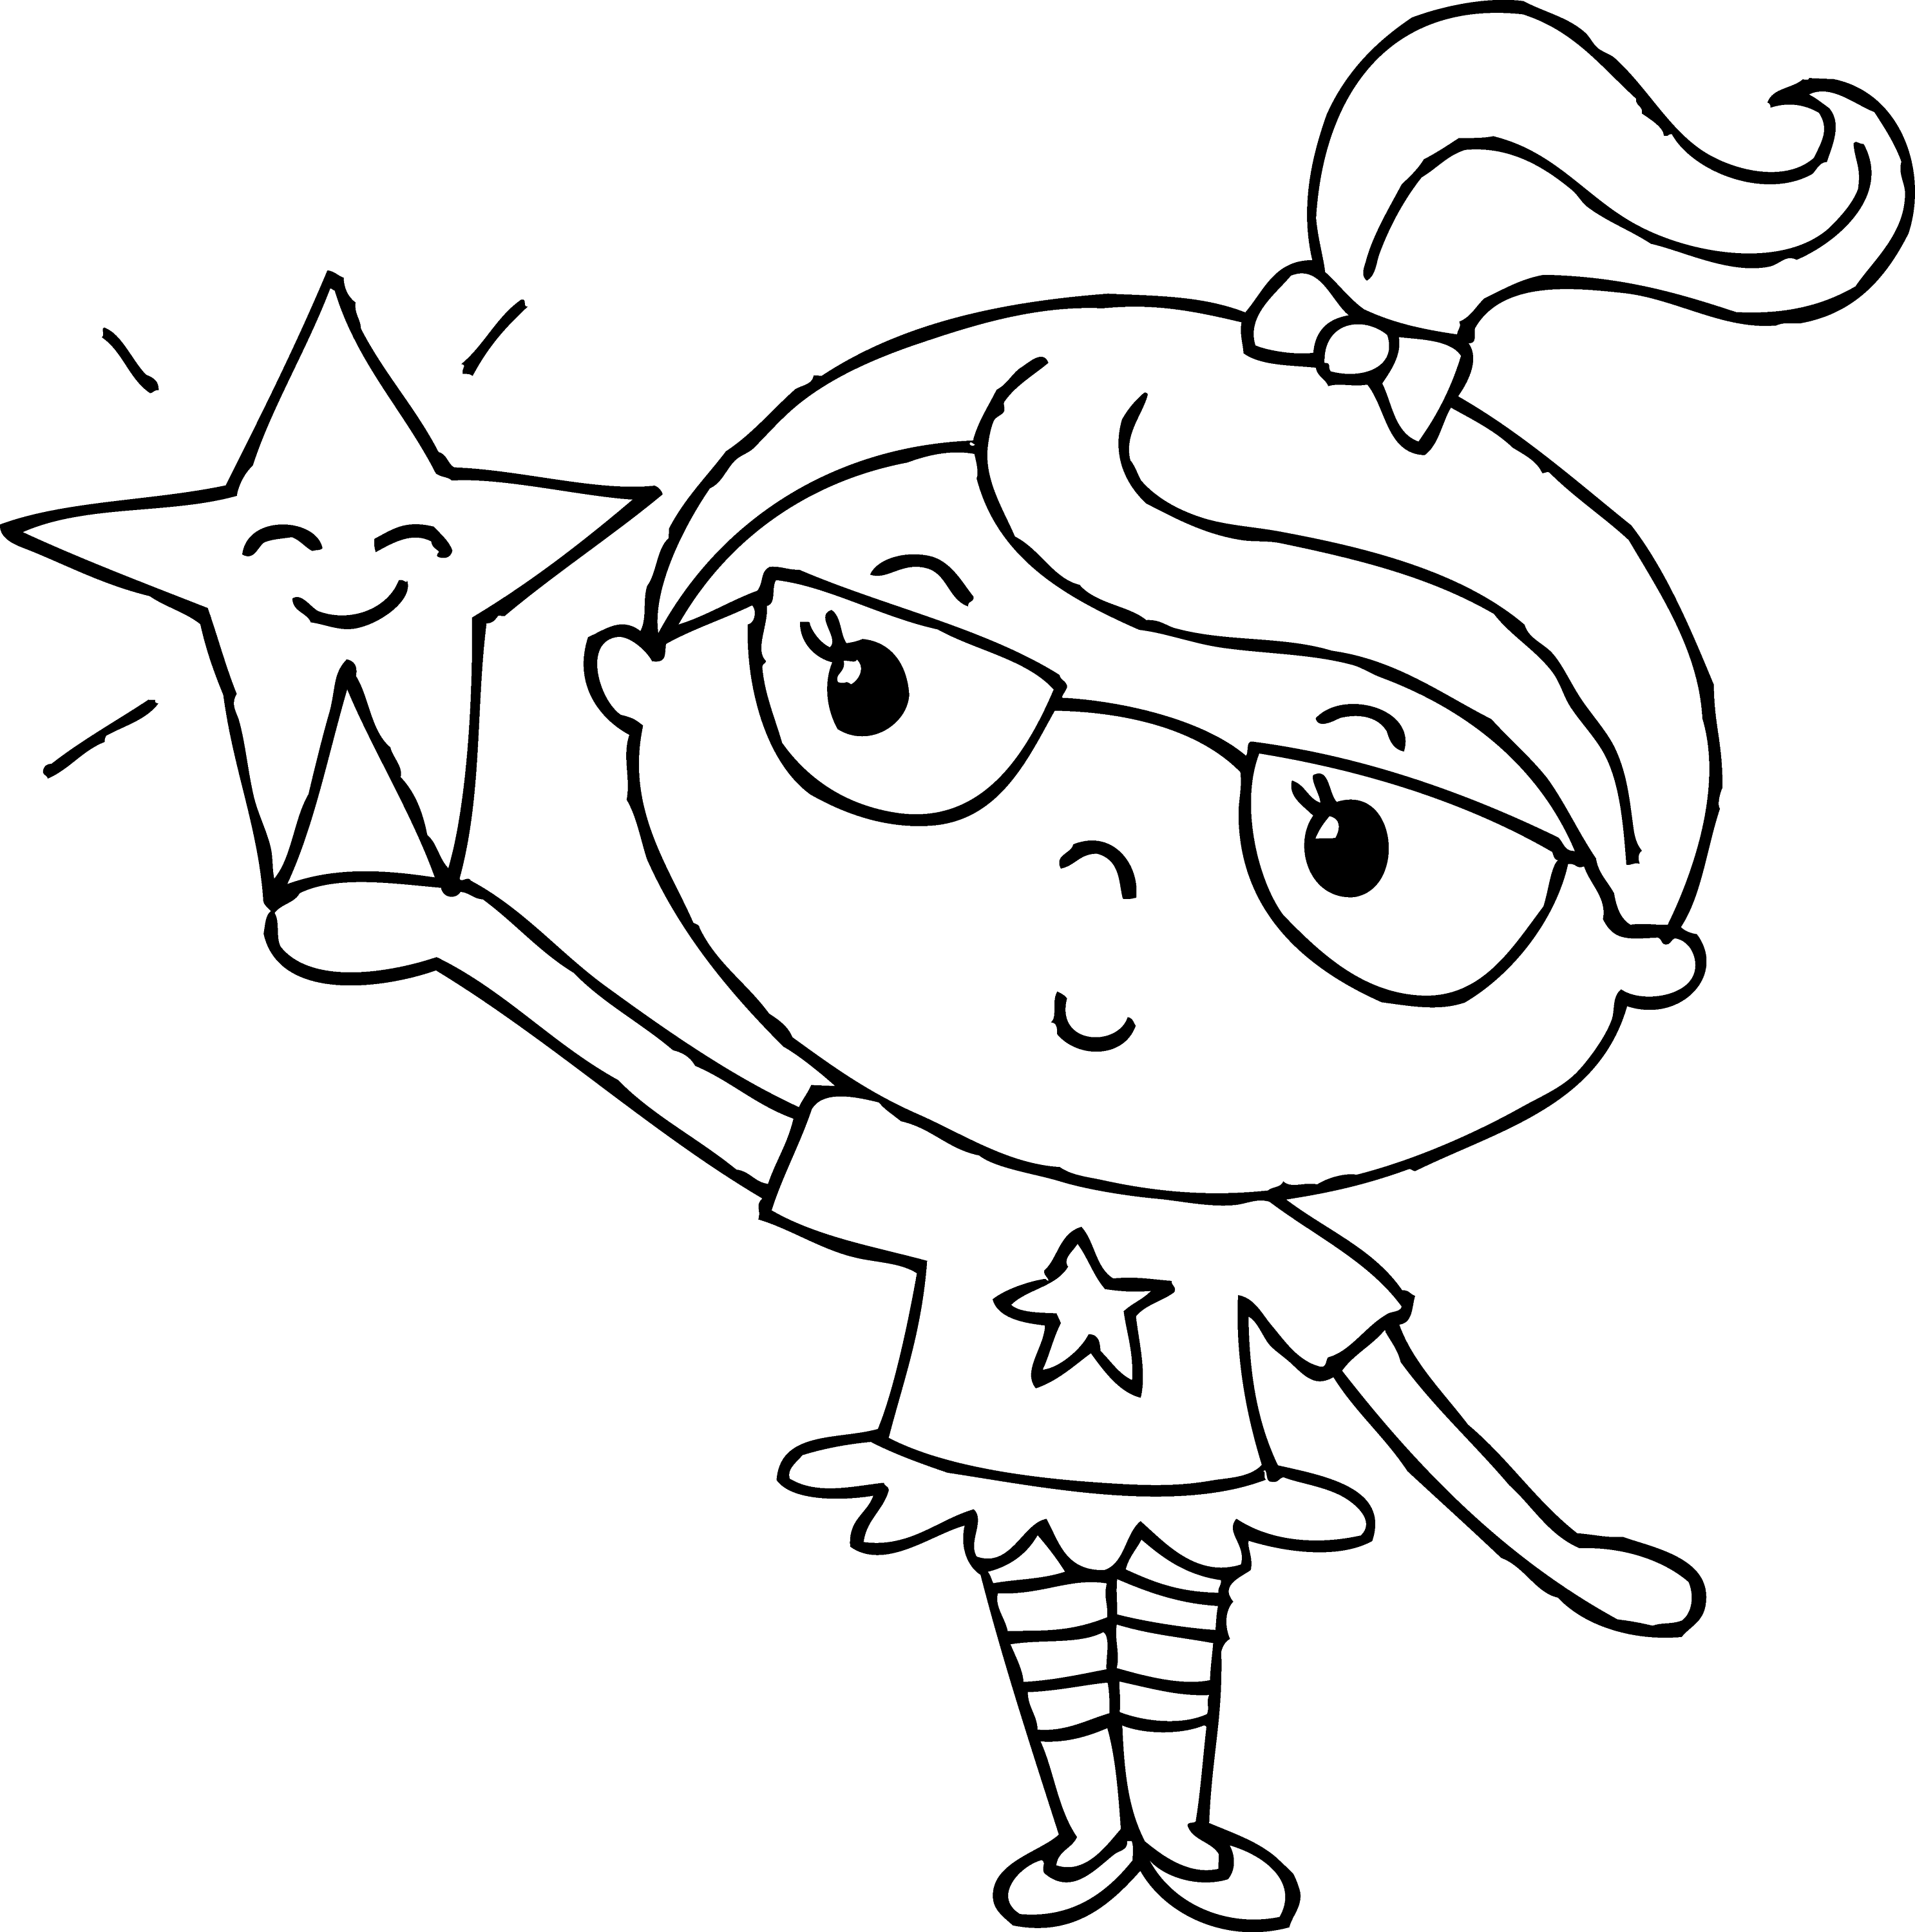 Lovely Twinkle Twinkle Little Star Coloring Page | Thousand of the Best